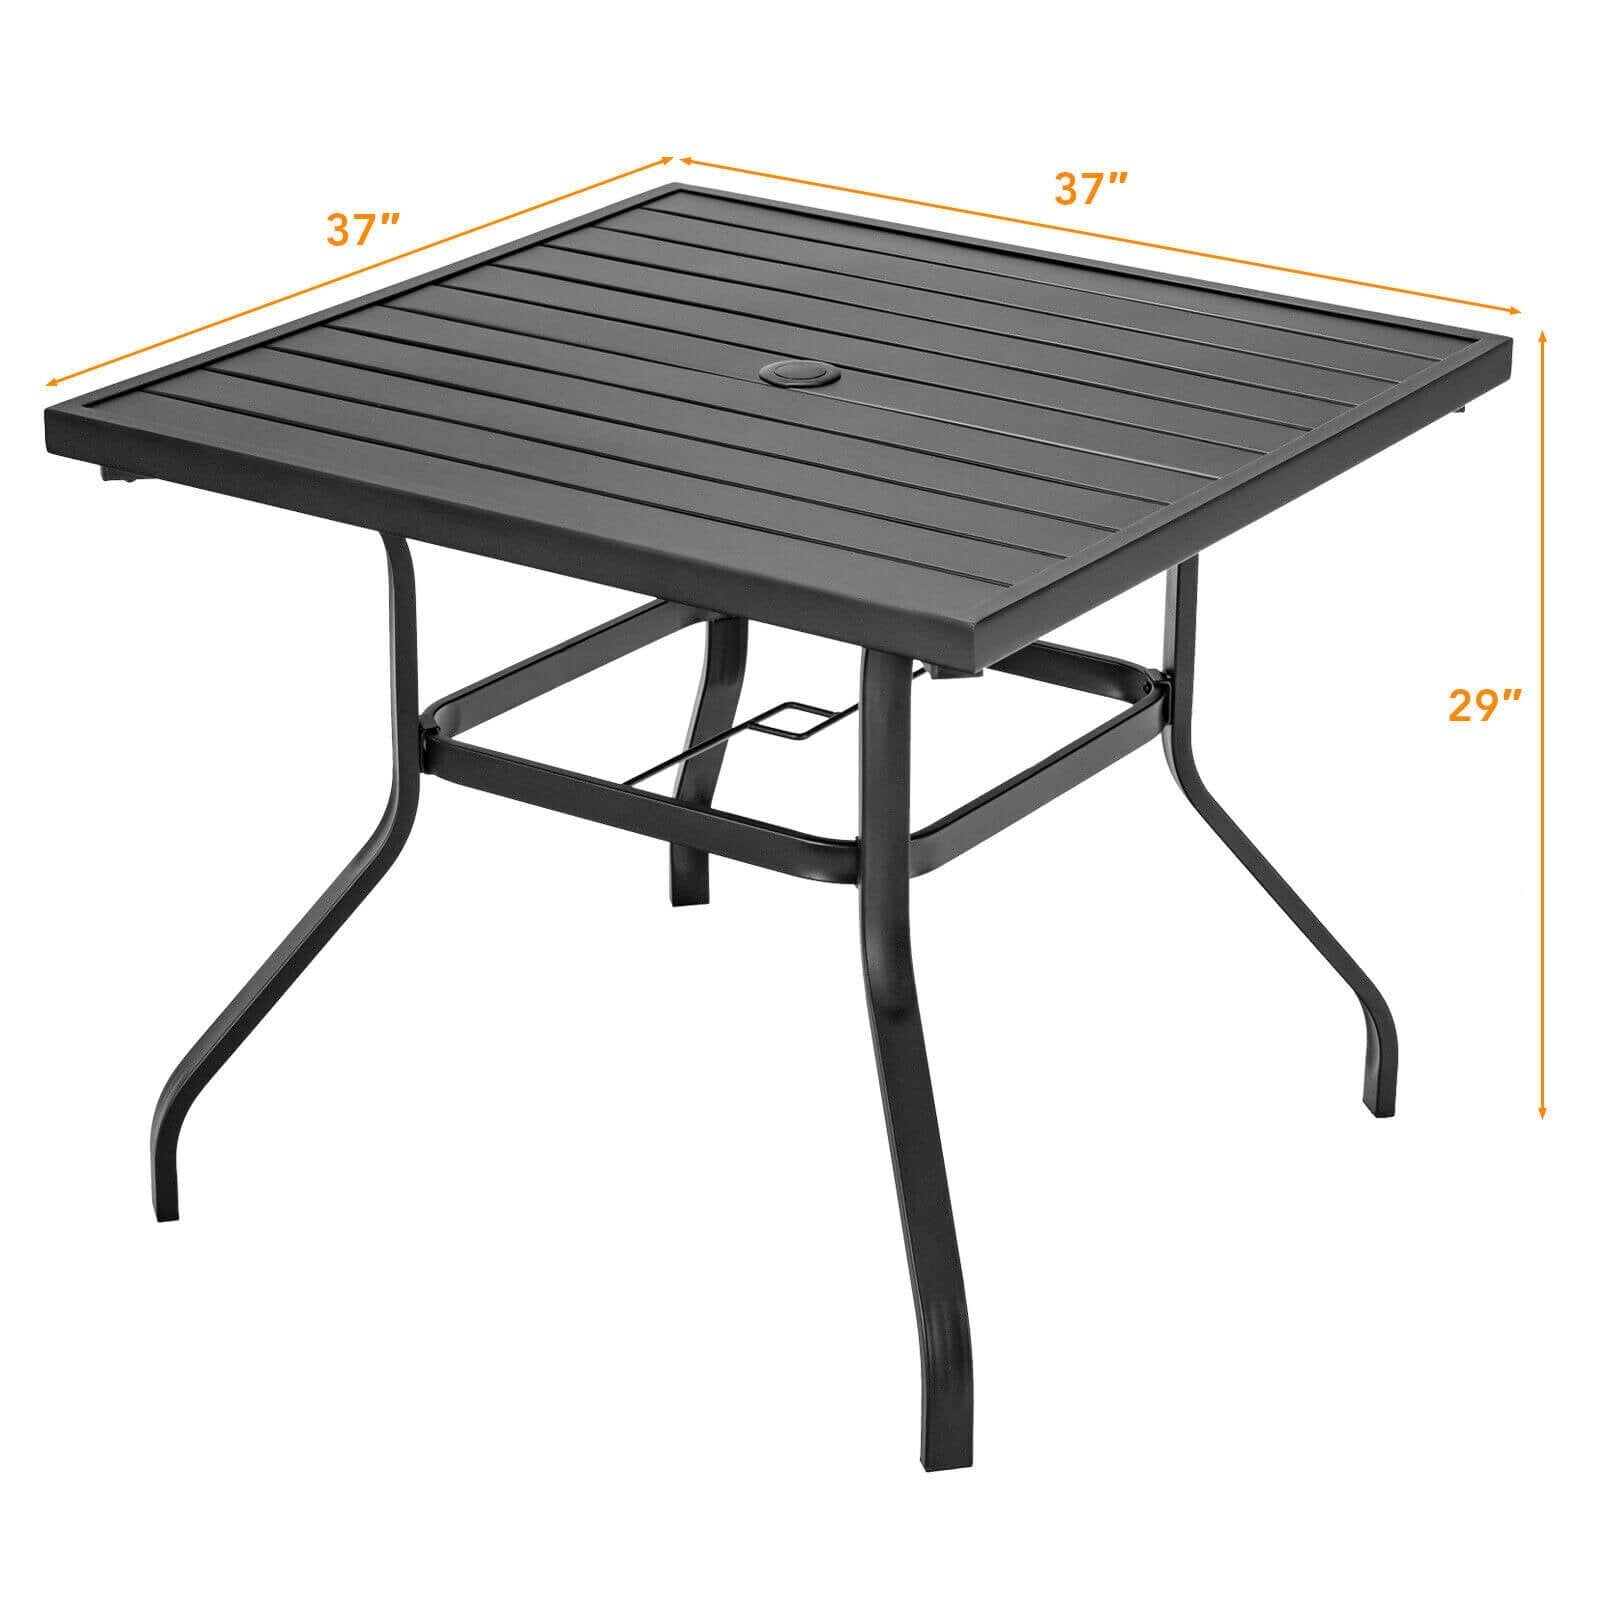 37 Inch Square Patio Dining Table with Umbrella Pole Hole, Black - Gallery Canada